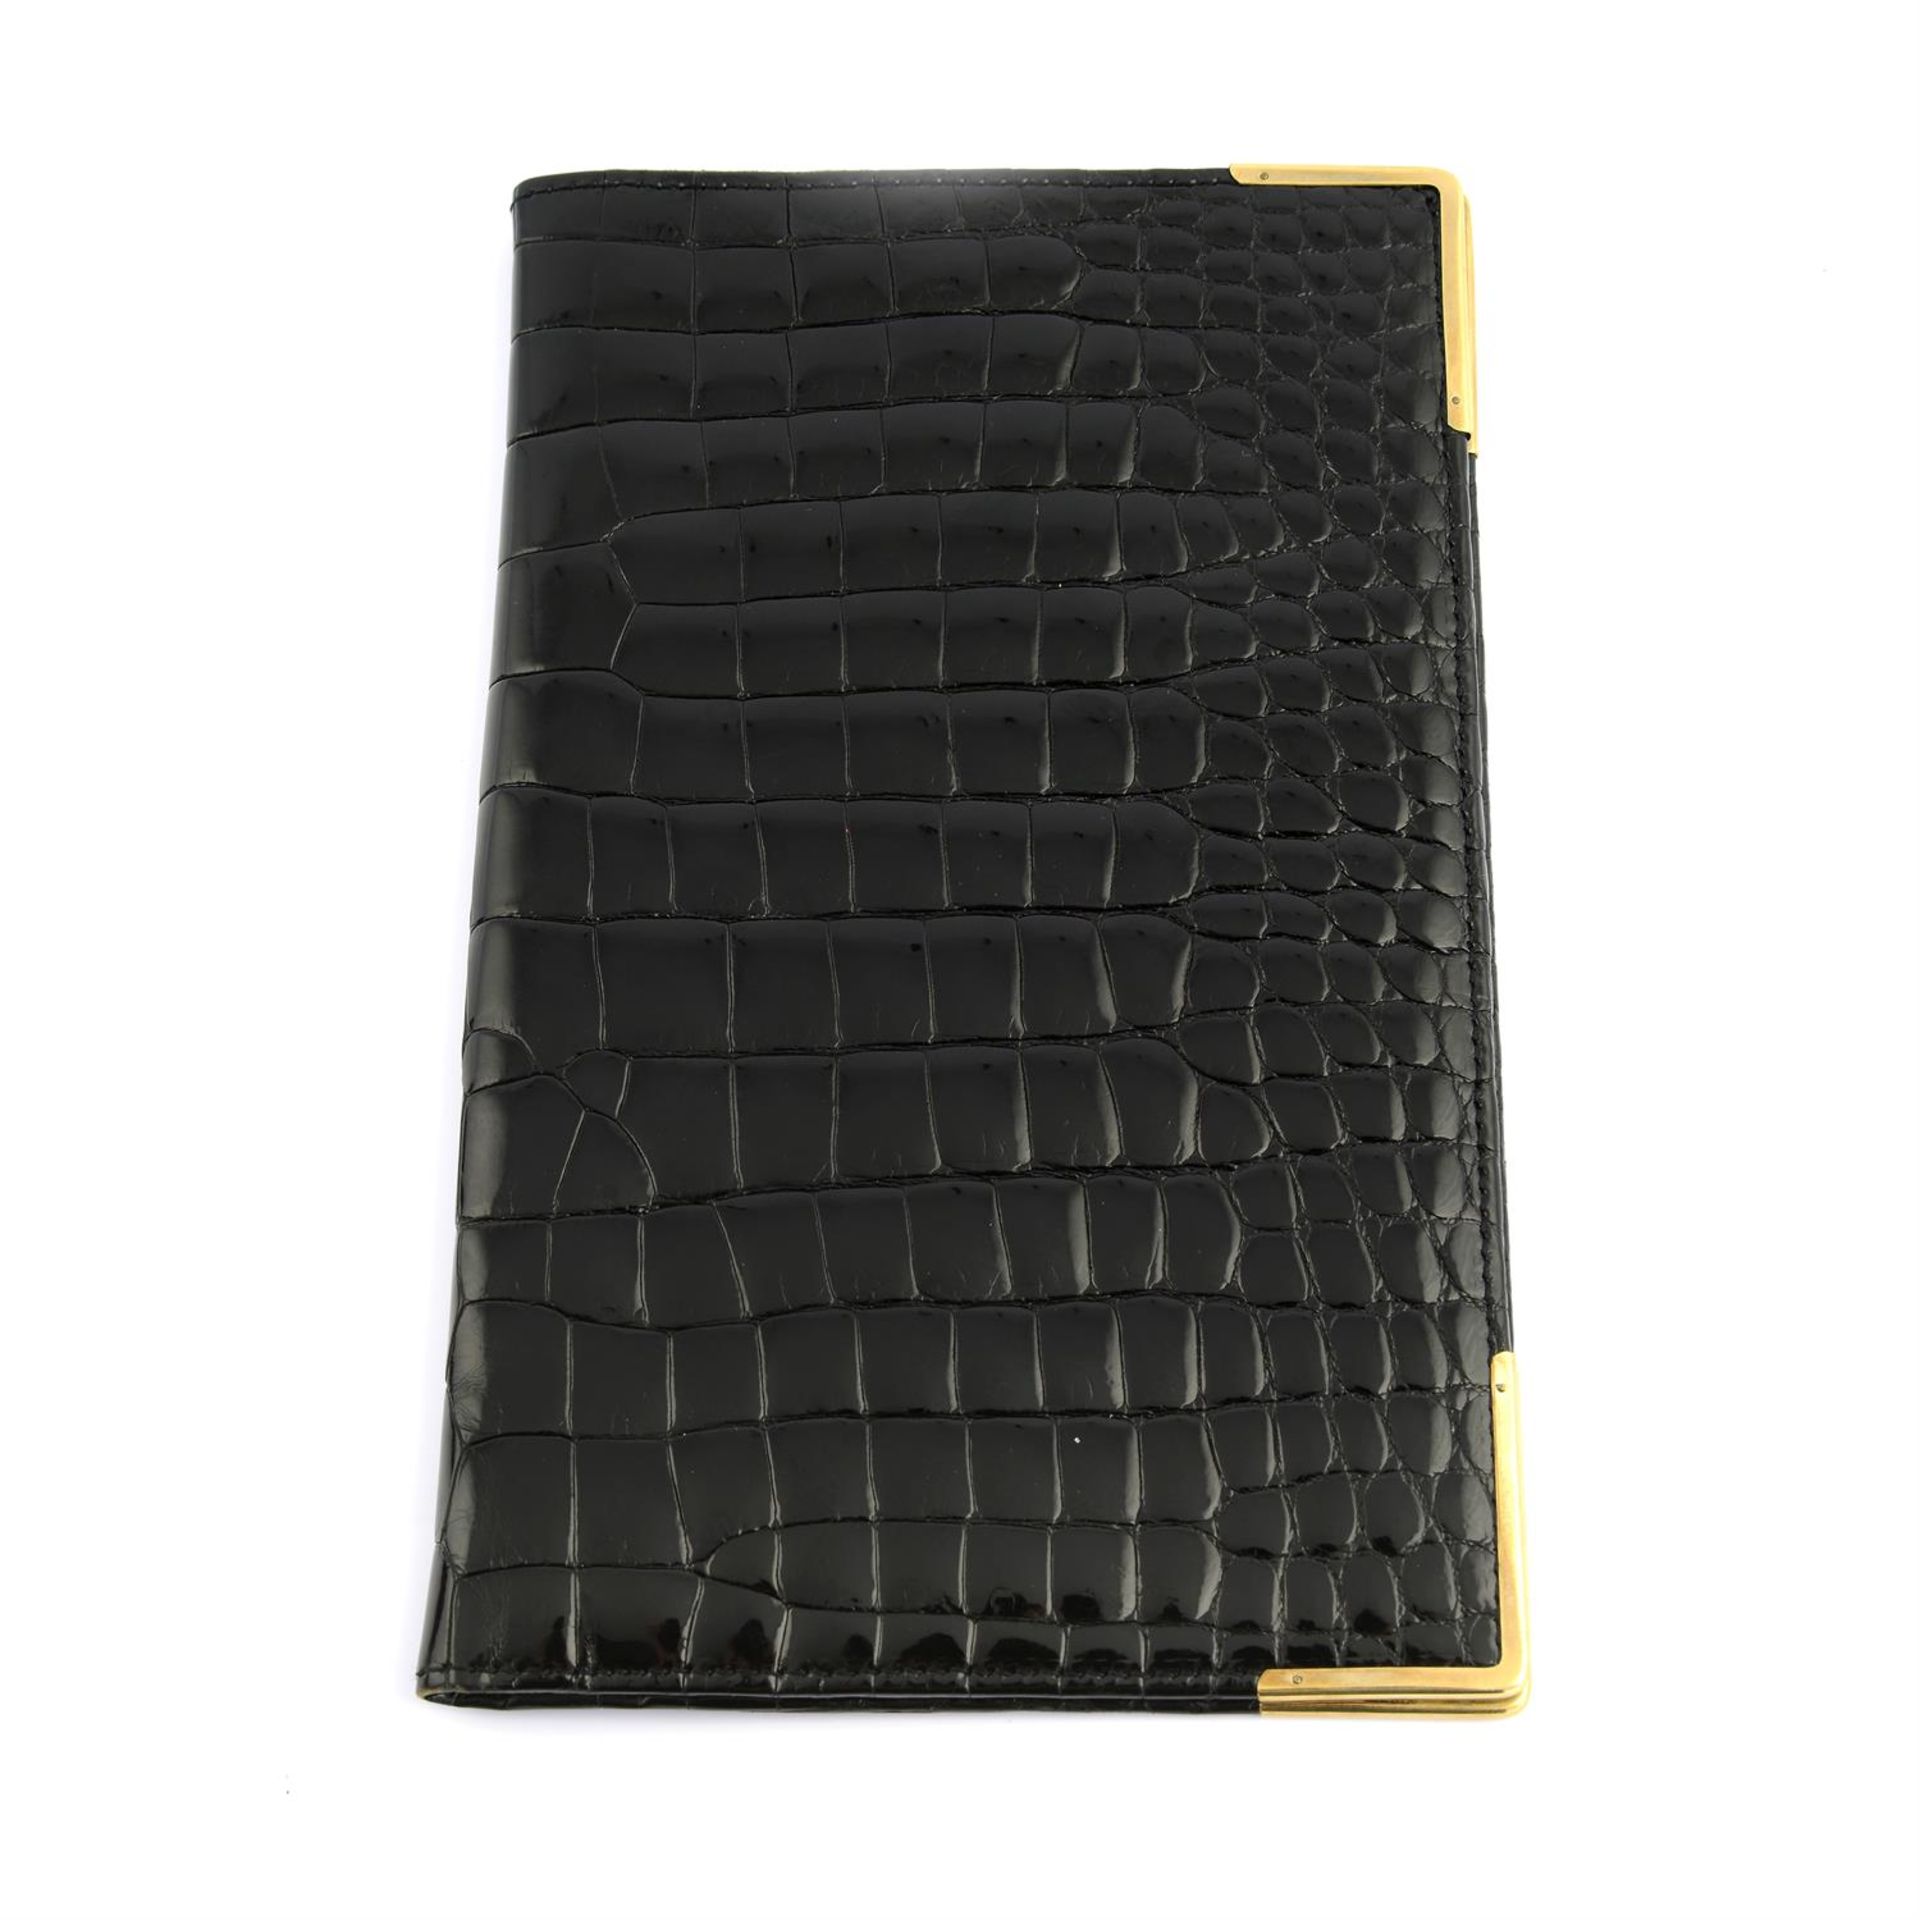 ASPREY - a black patent Crocodile leather wallet with 9ct gold mounted edges.